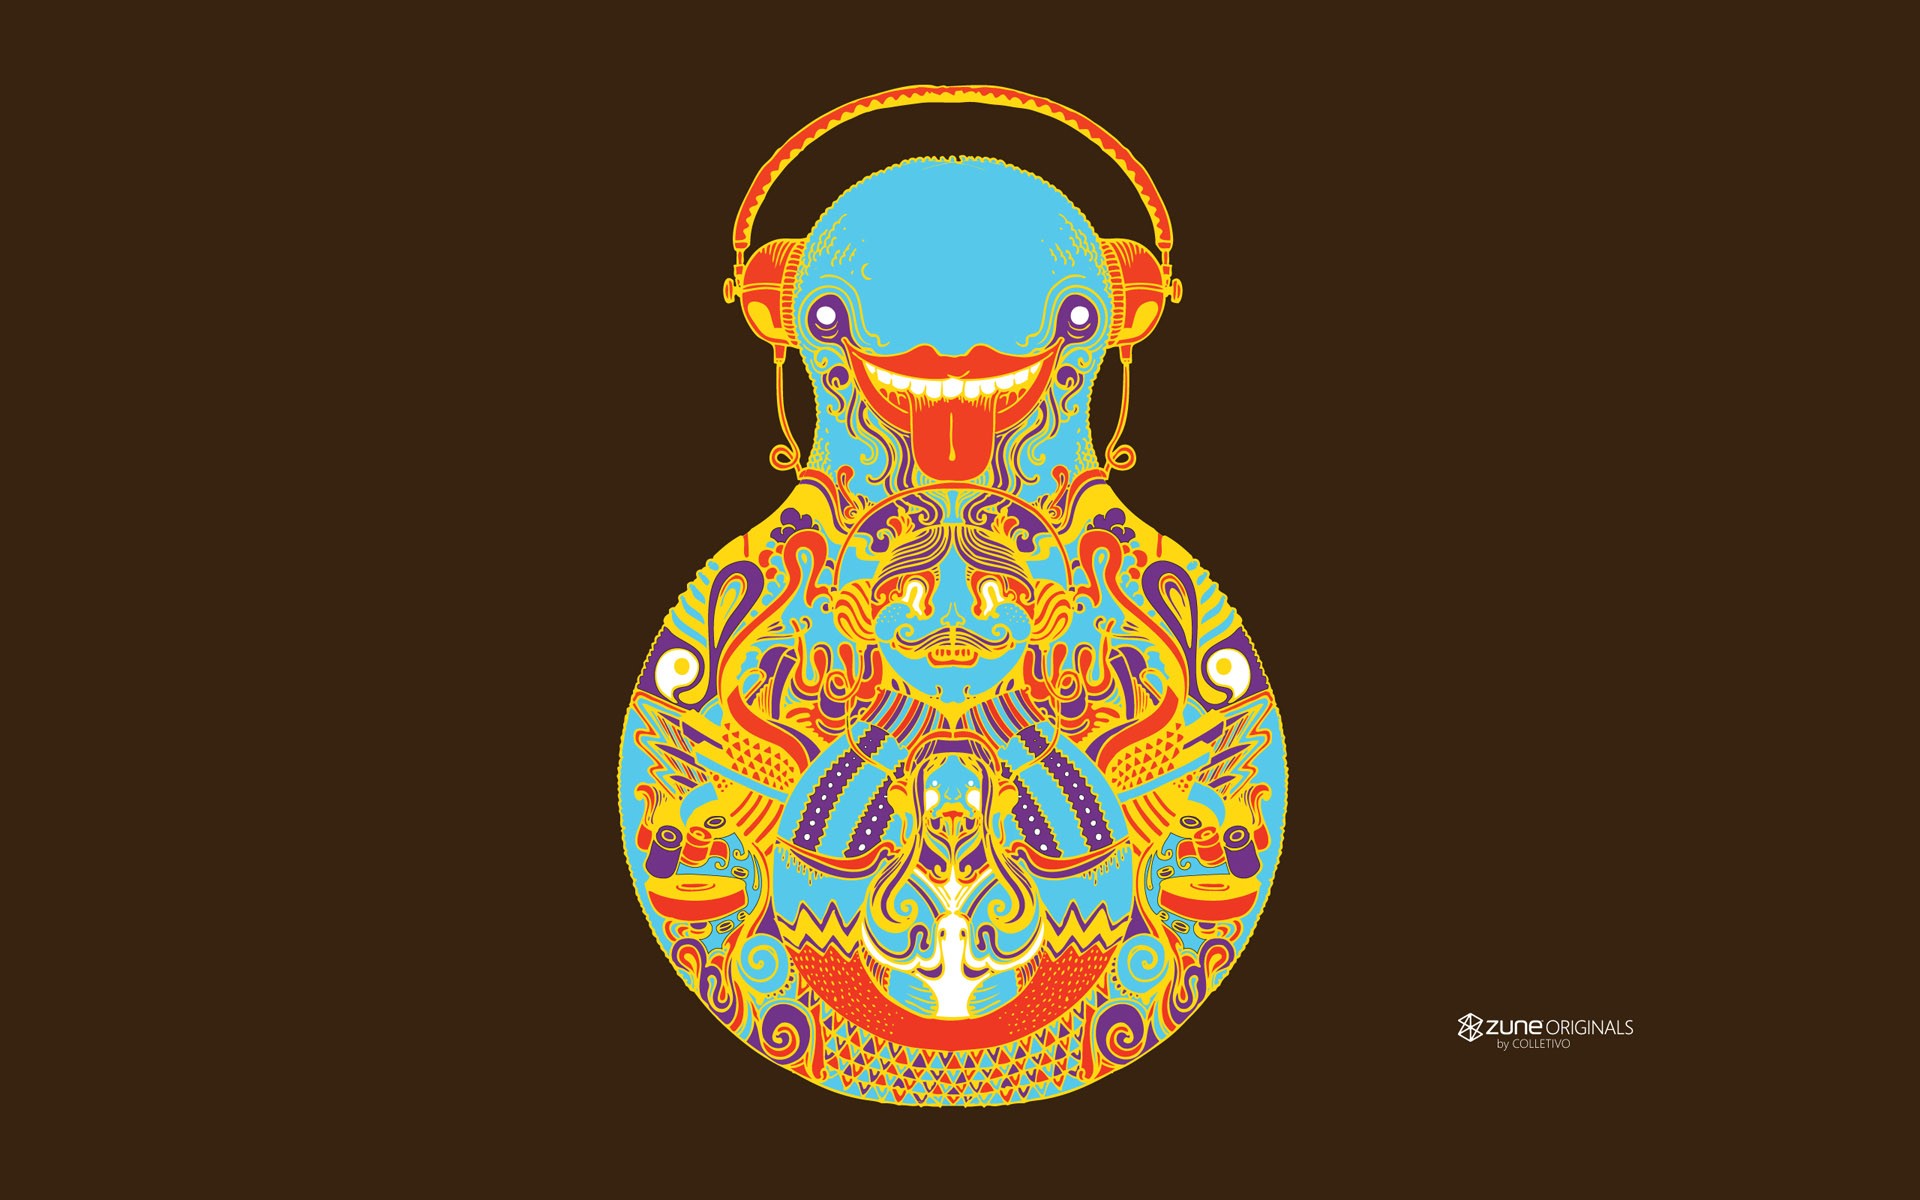 General 1920x1200 psychedelic artwork brown background surreal simple background Zune